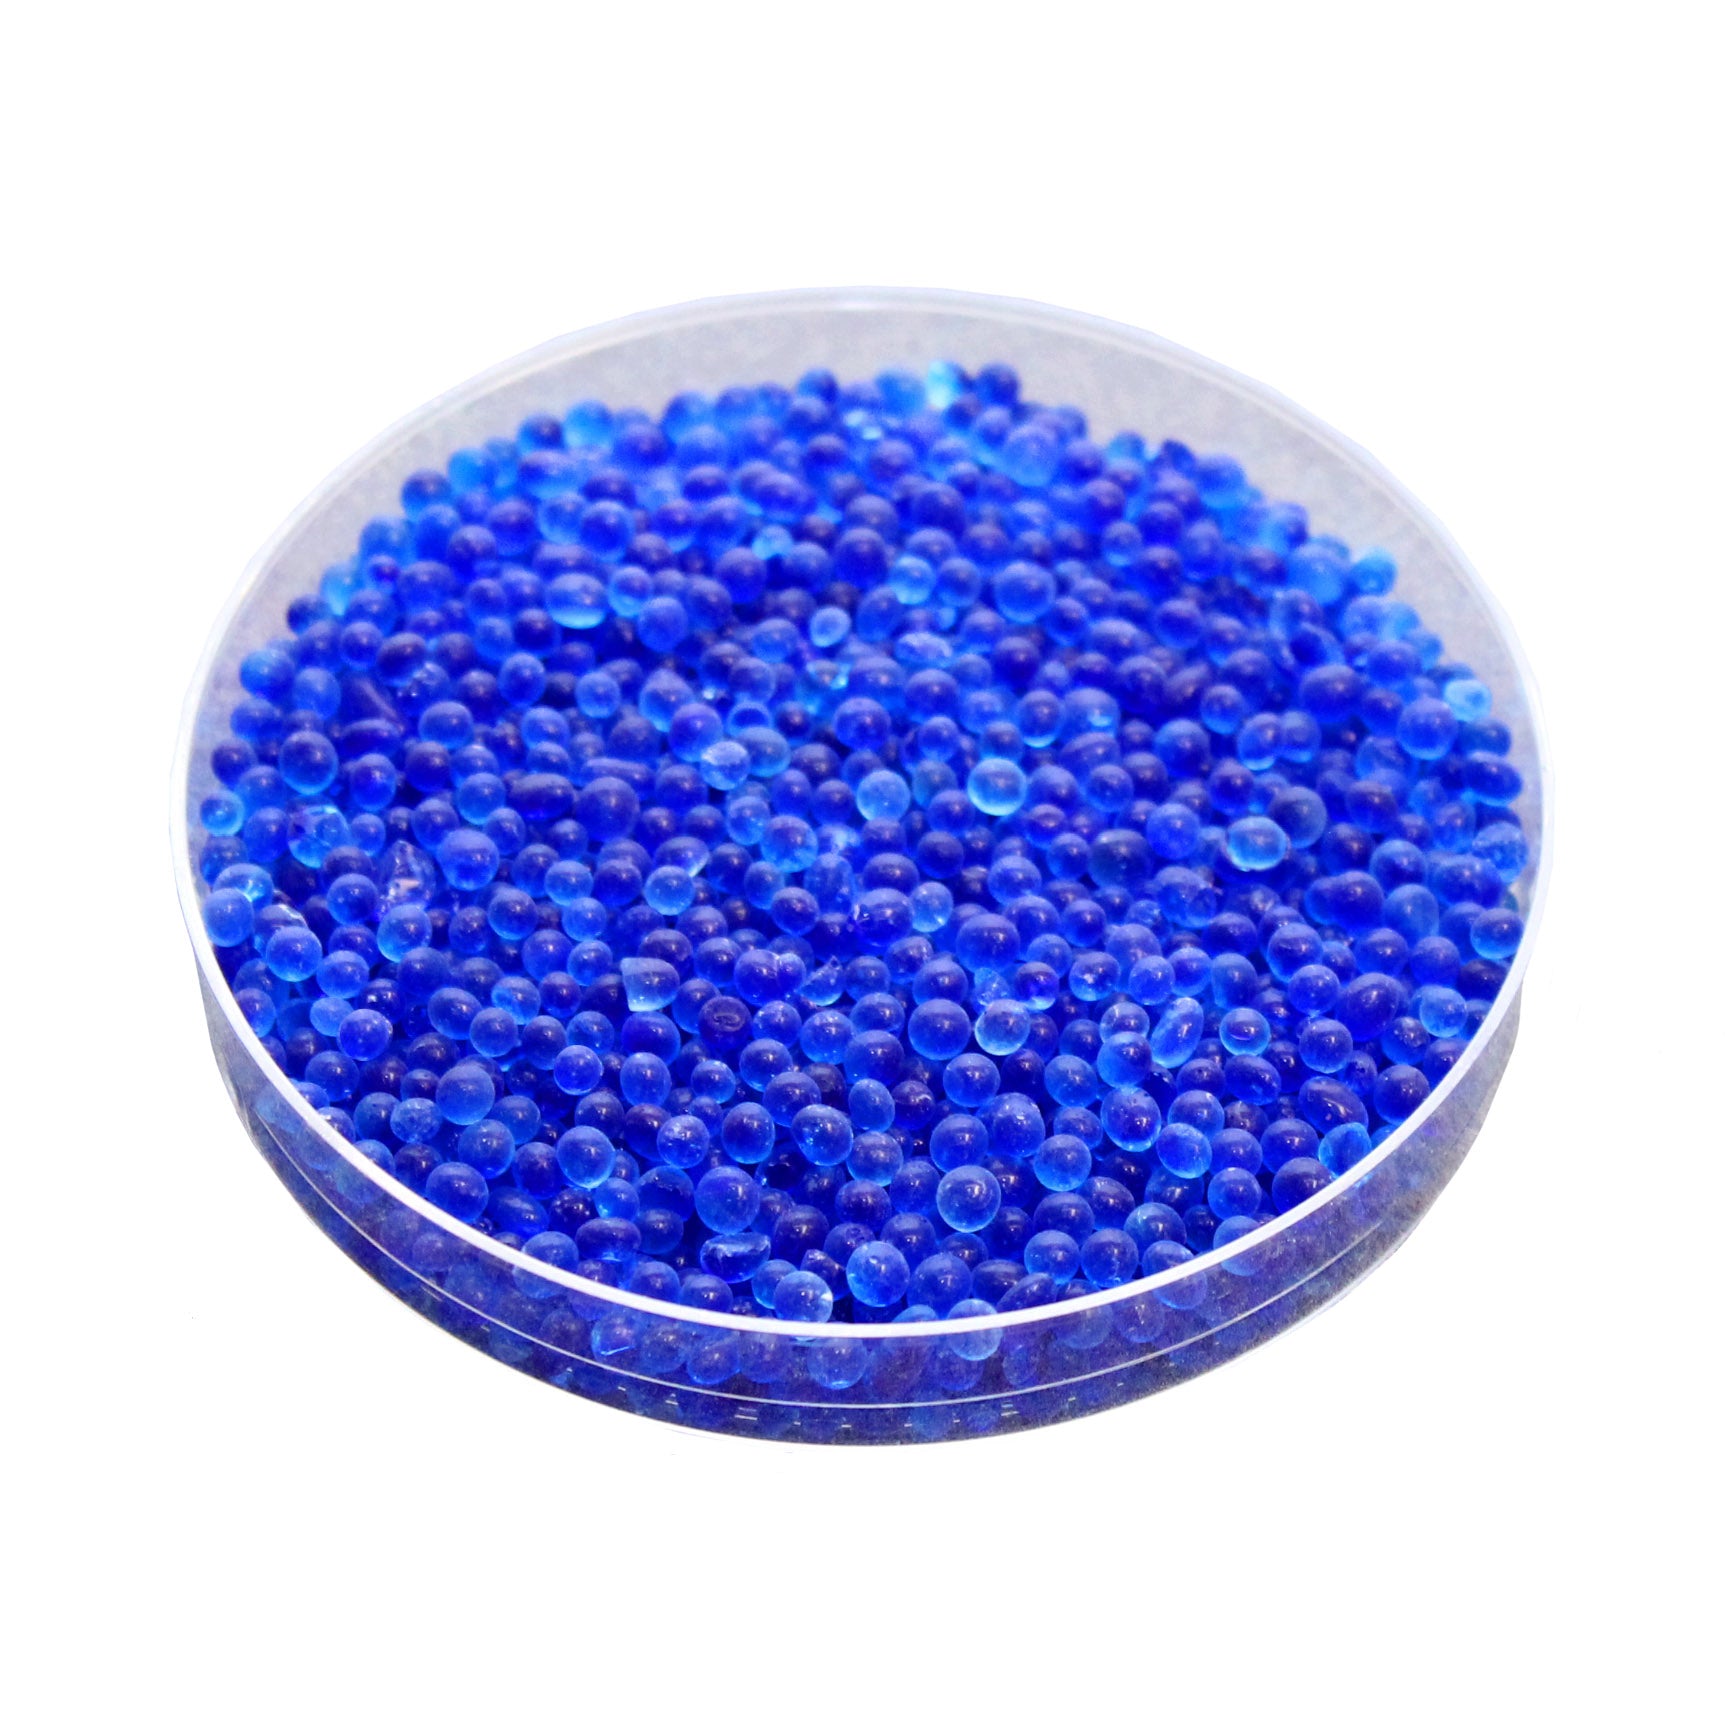 (44 LBS) "Dry & Dry" Premium Blue Indicating Silica Gel Desiccant Beads